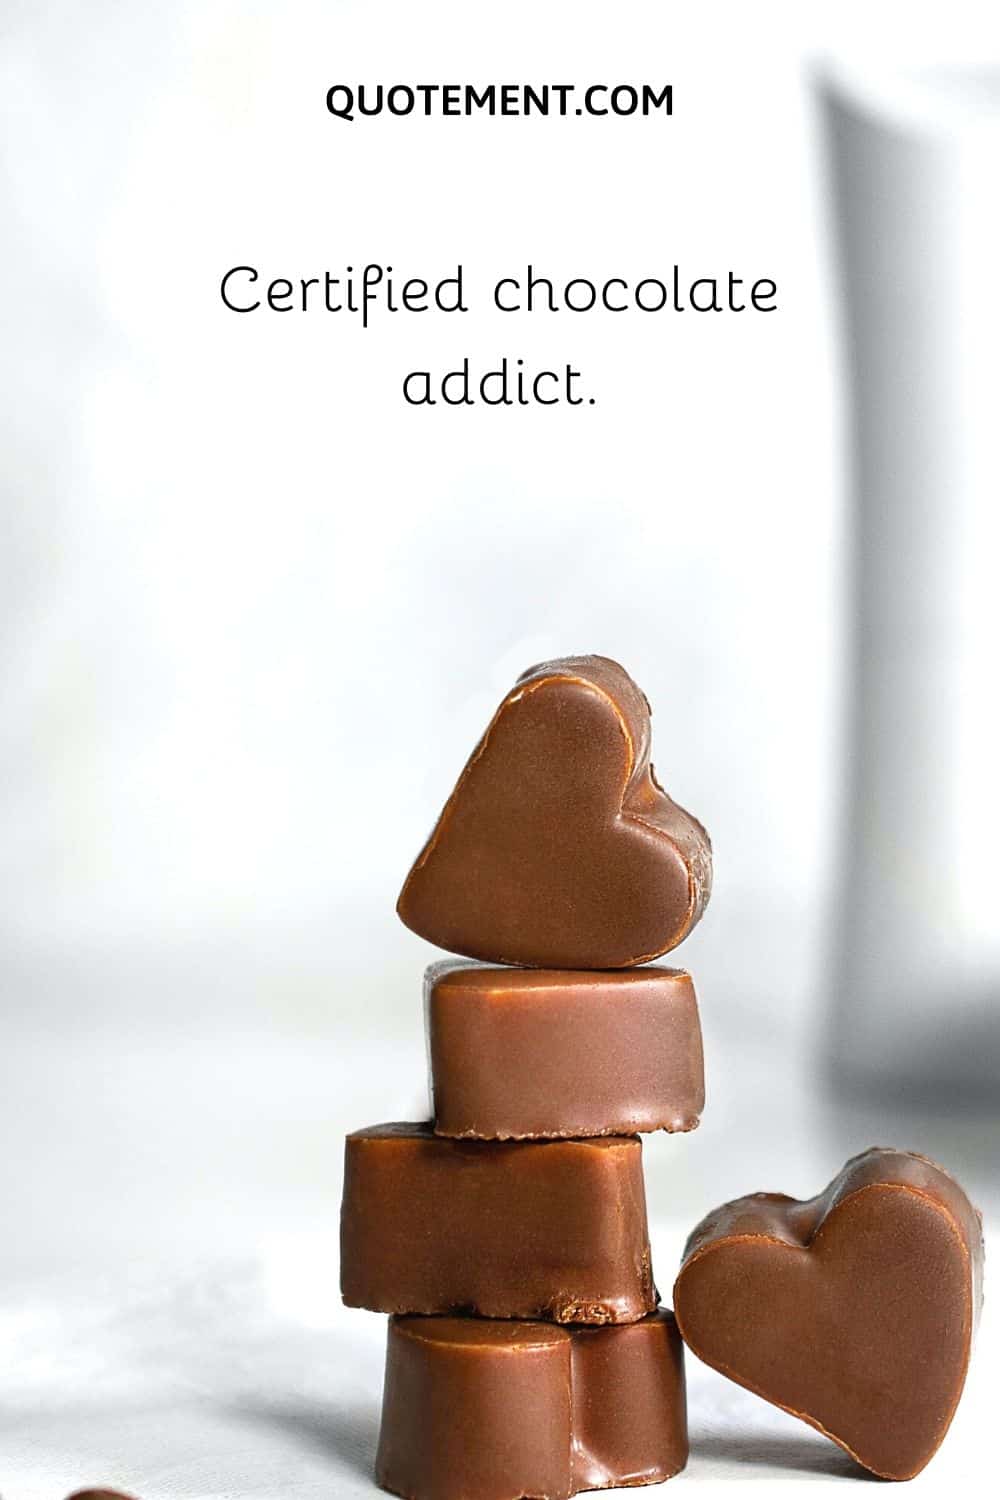 Certified chocolate addict.